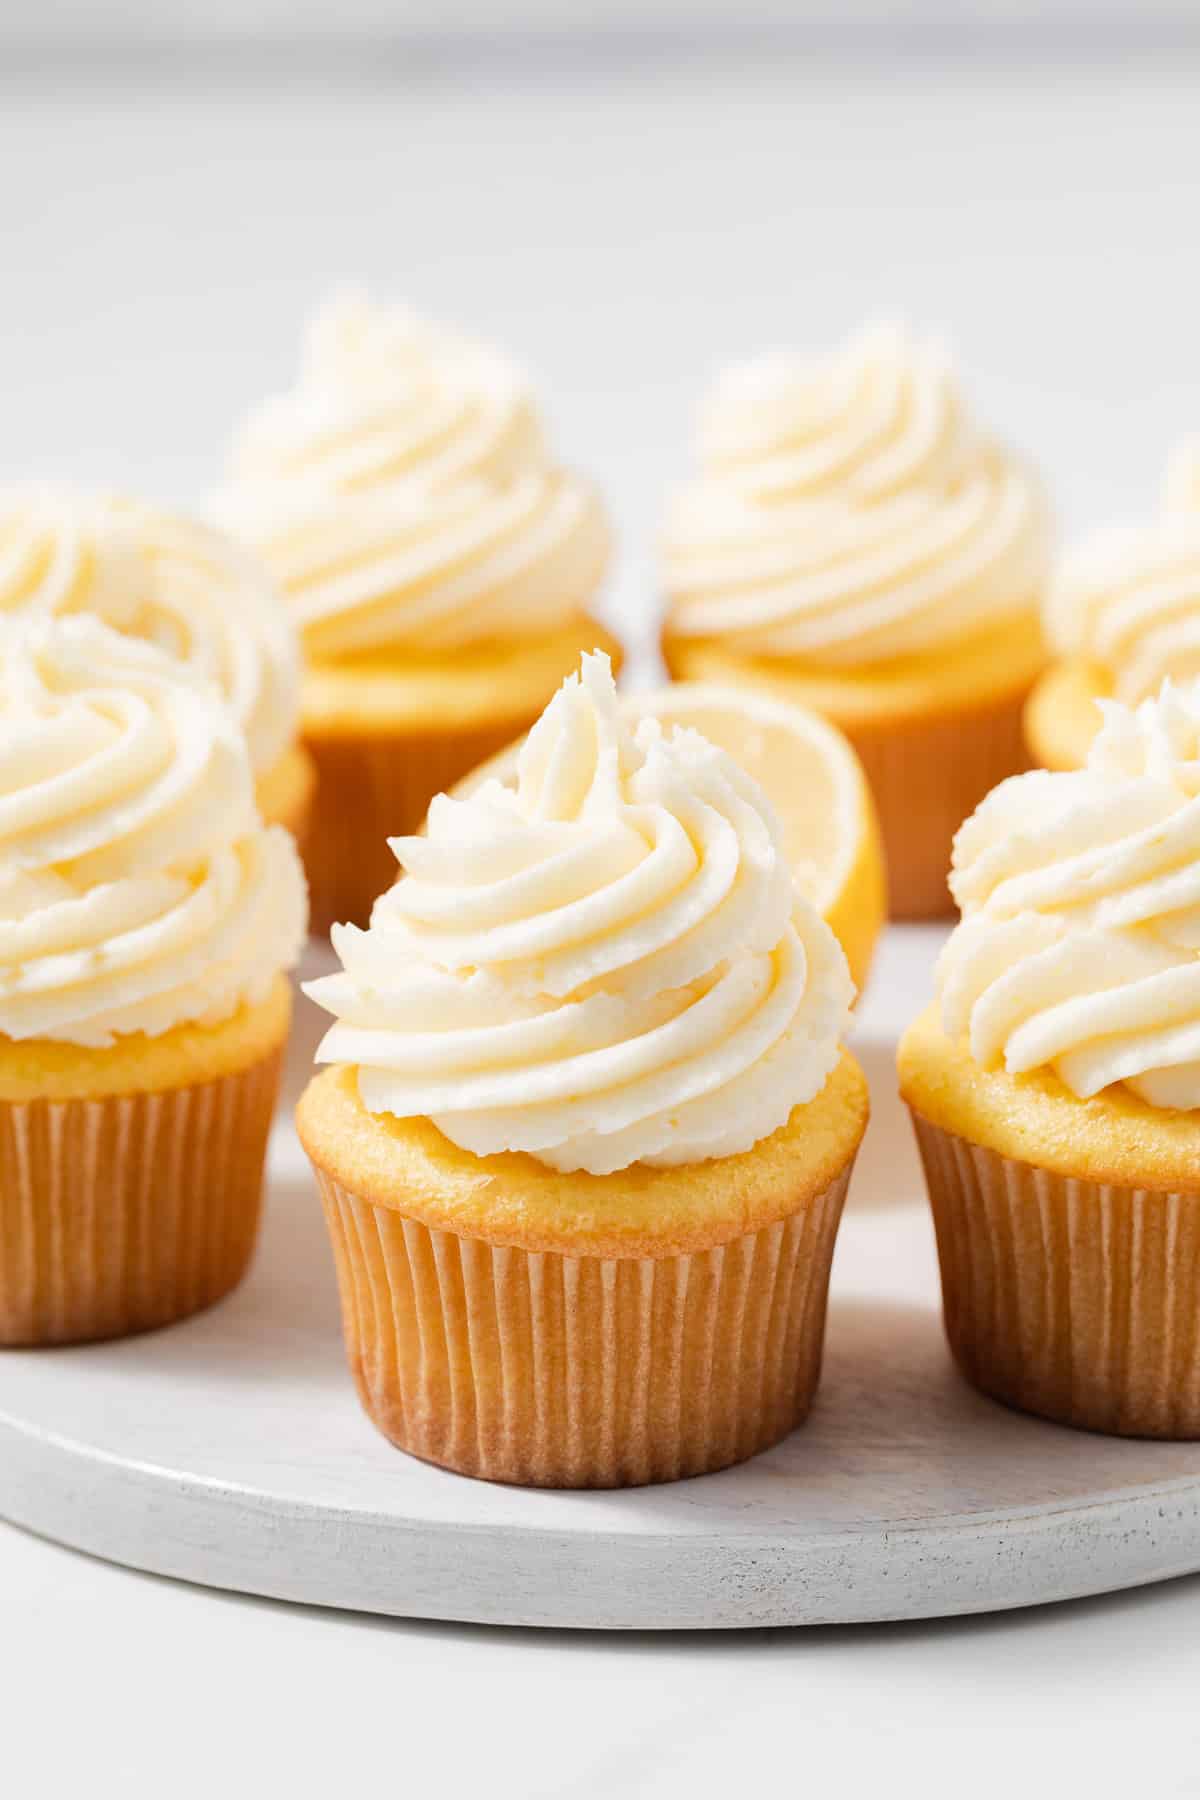 Side view of cupcakes topped with lemon buttercream frosting.